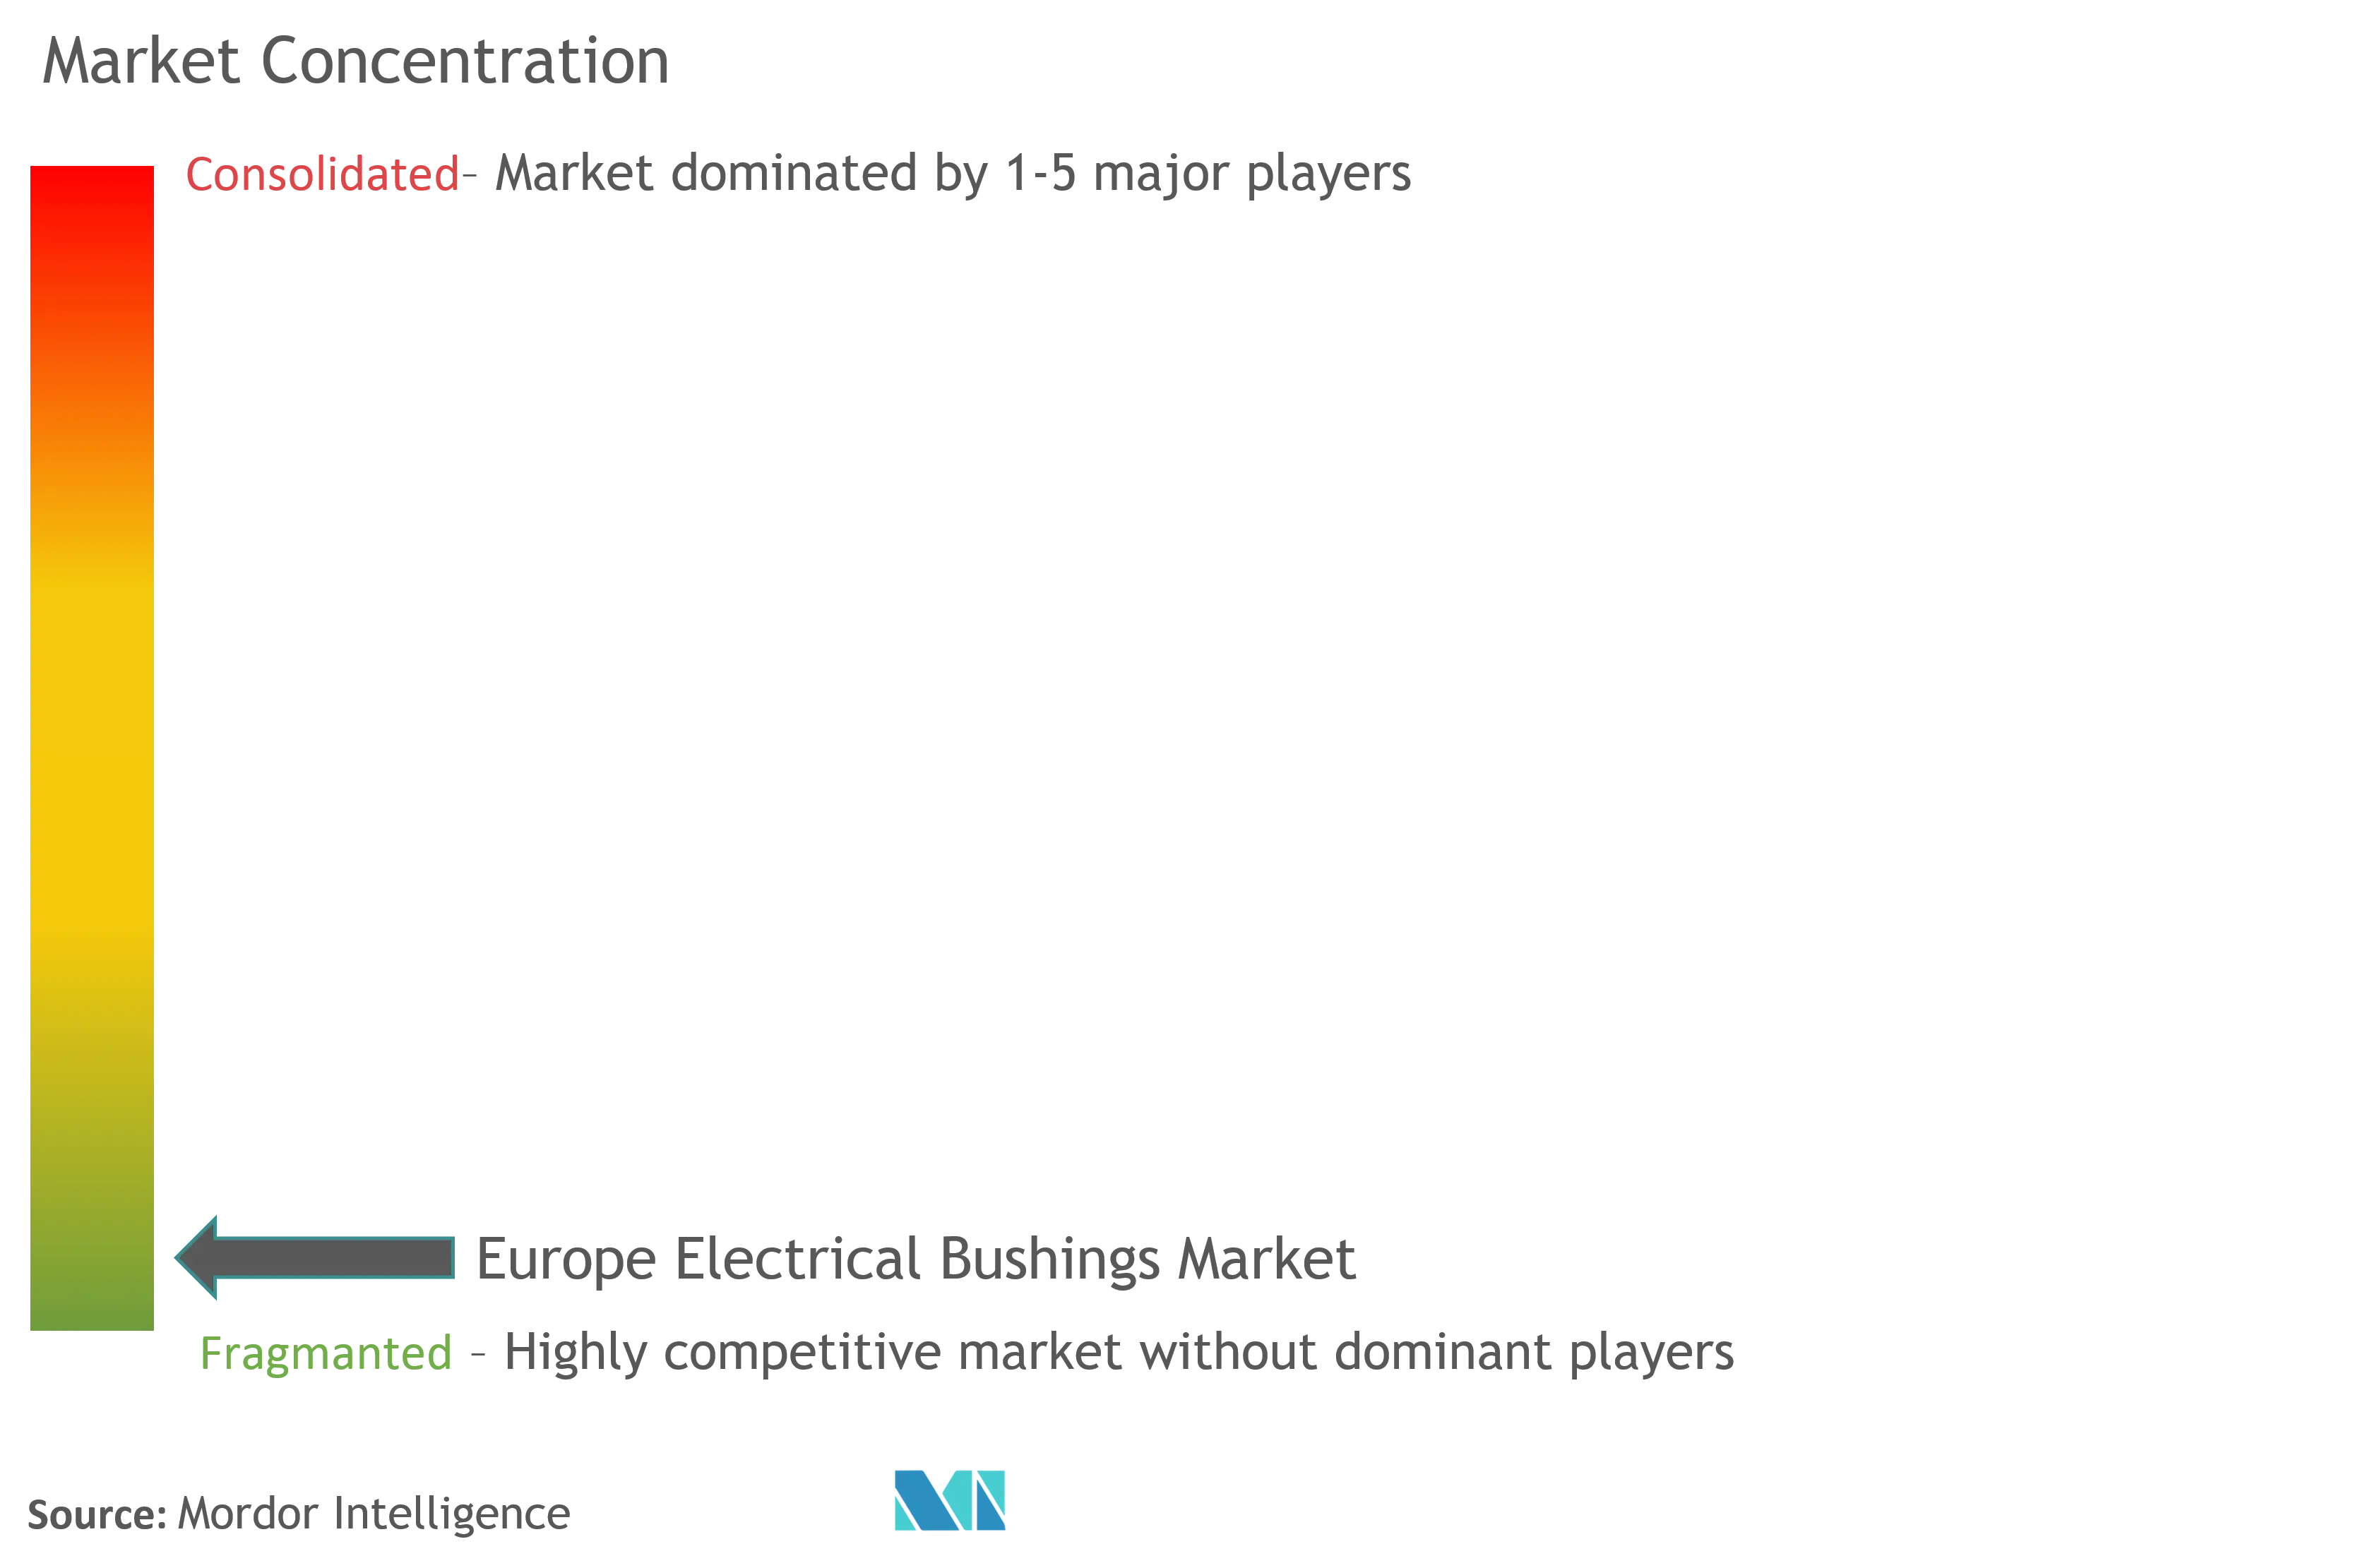 Europe Electrical Bushing Market Concentration